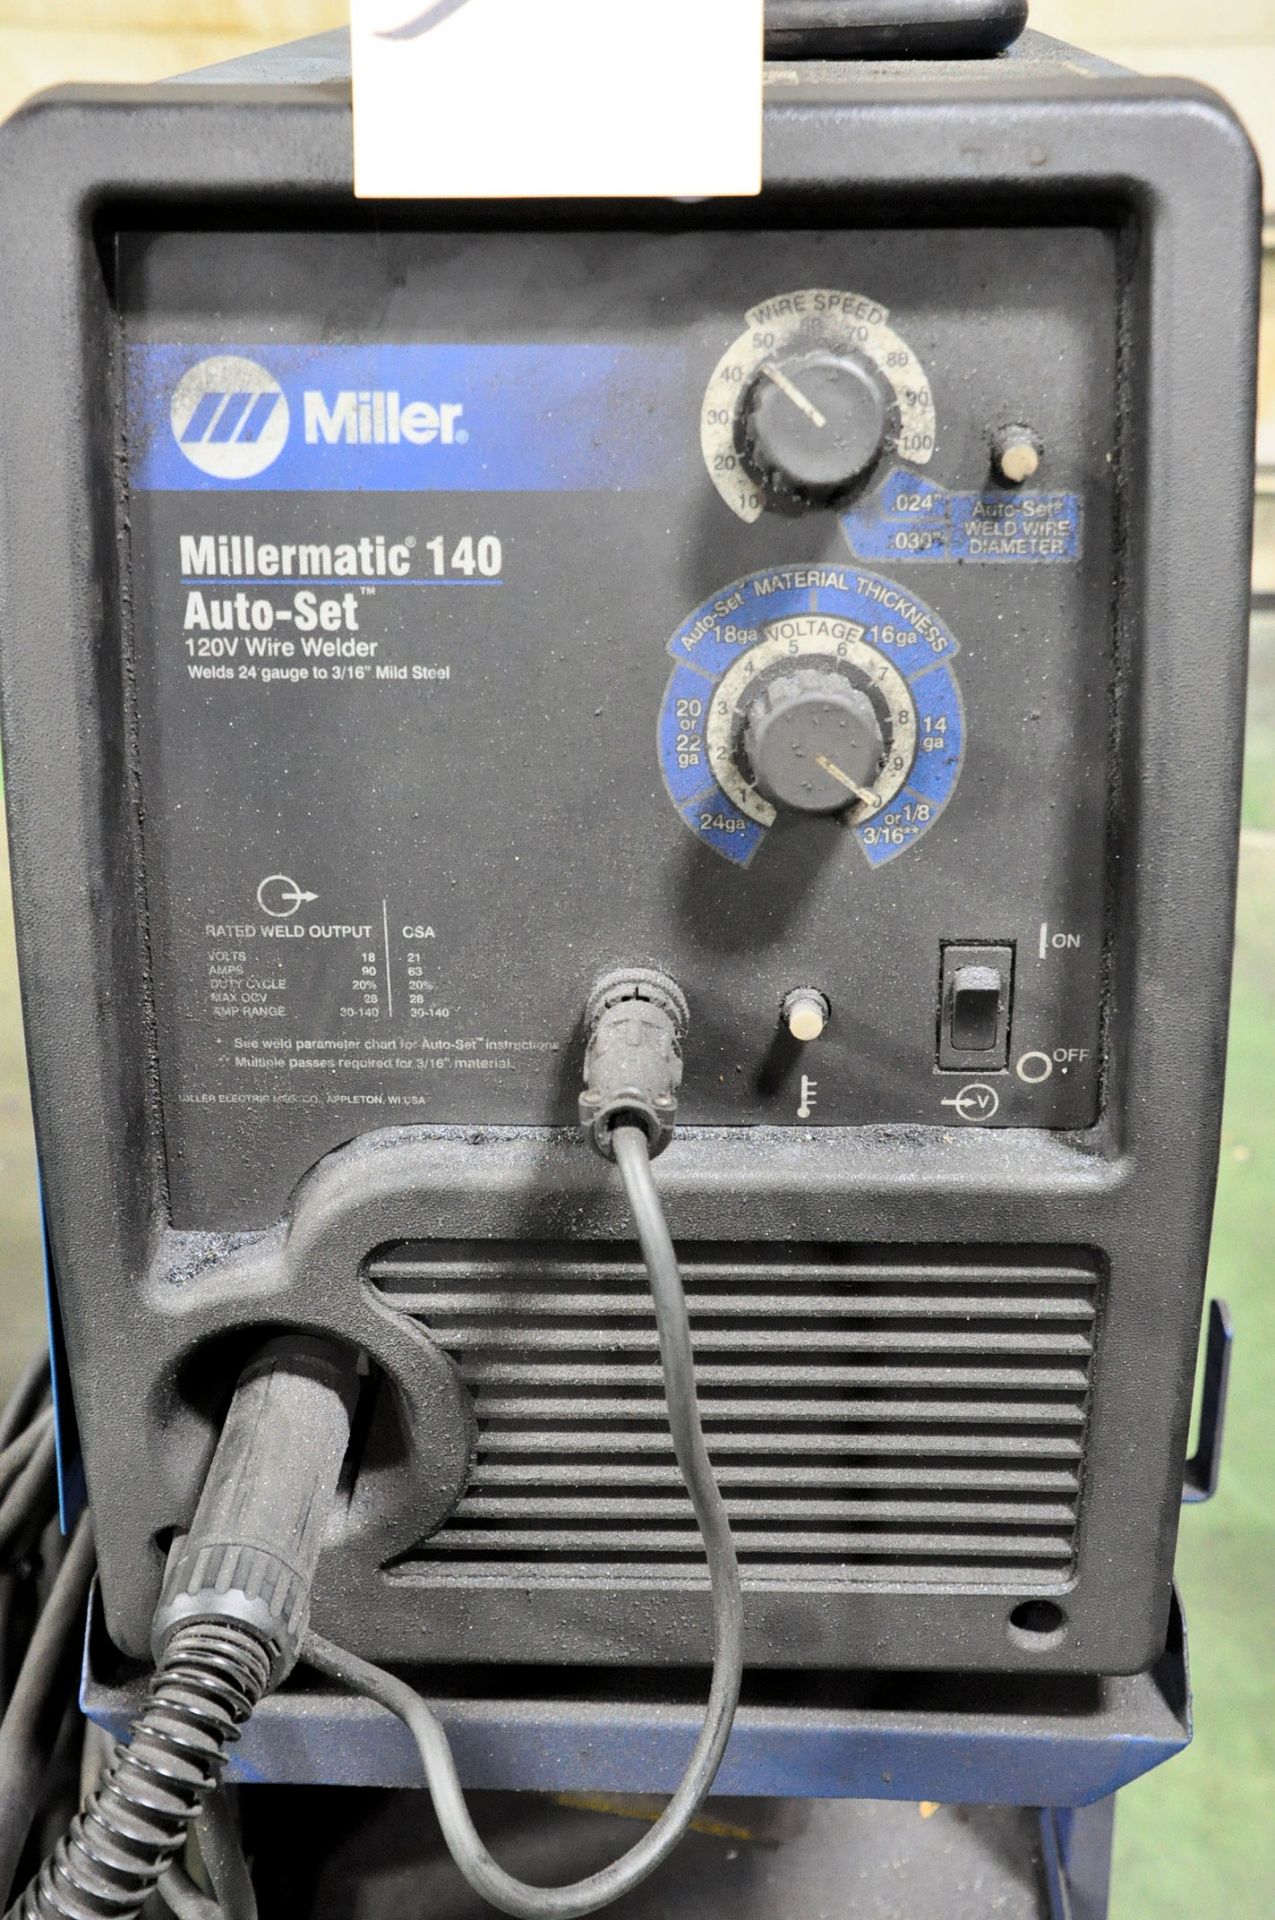 Miller Millermatic 140 Auto-Set, 90-Amps Capacity Wire Feed Mig Welder, S/n MD15282BN, with Leads - Image 2 of 3